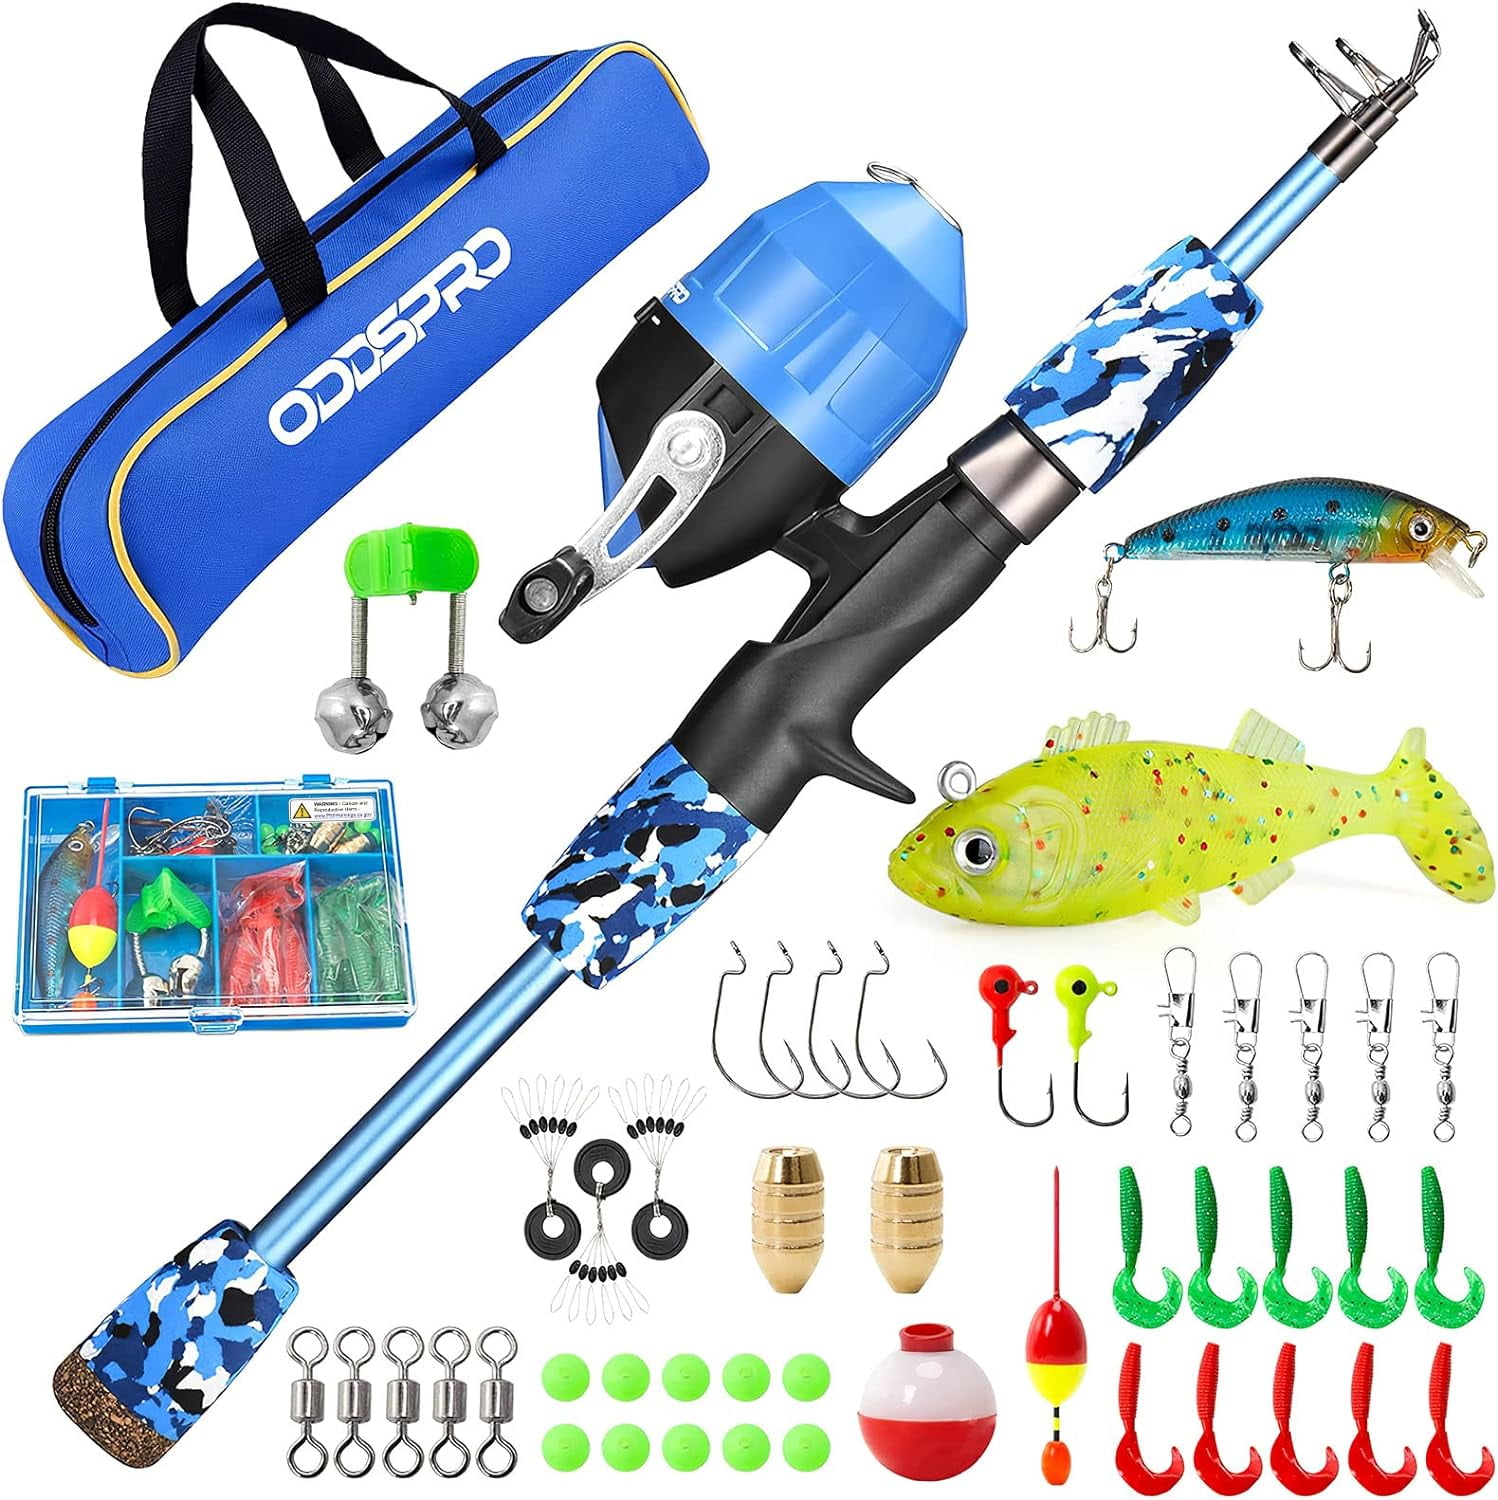 ODDSPRO Kids Fishing Pole Pink, Portable Telescopic Fishing Rod and Reel  Combo Kit - with Spincast Fishing Reel Tackle Box for Girls, Youth Blue  1.5M